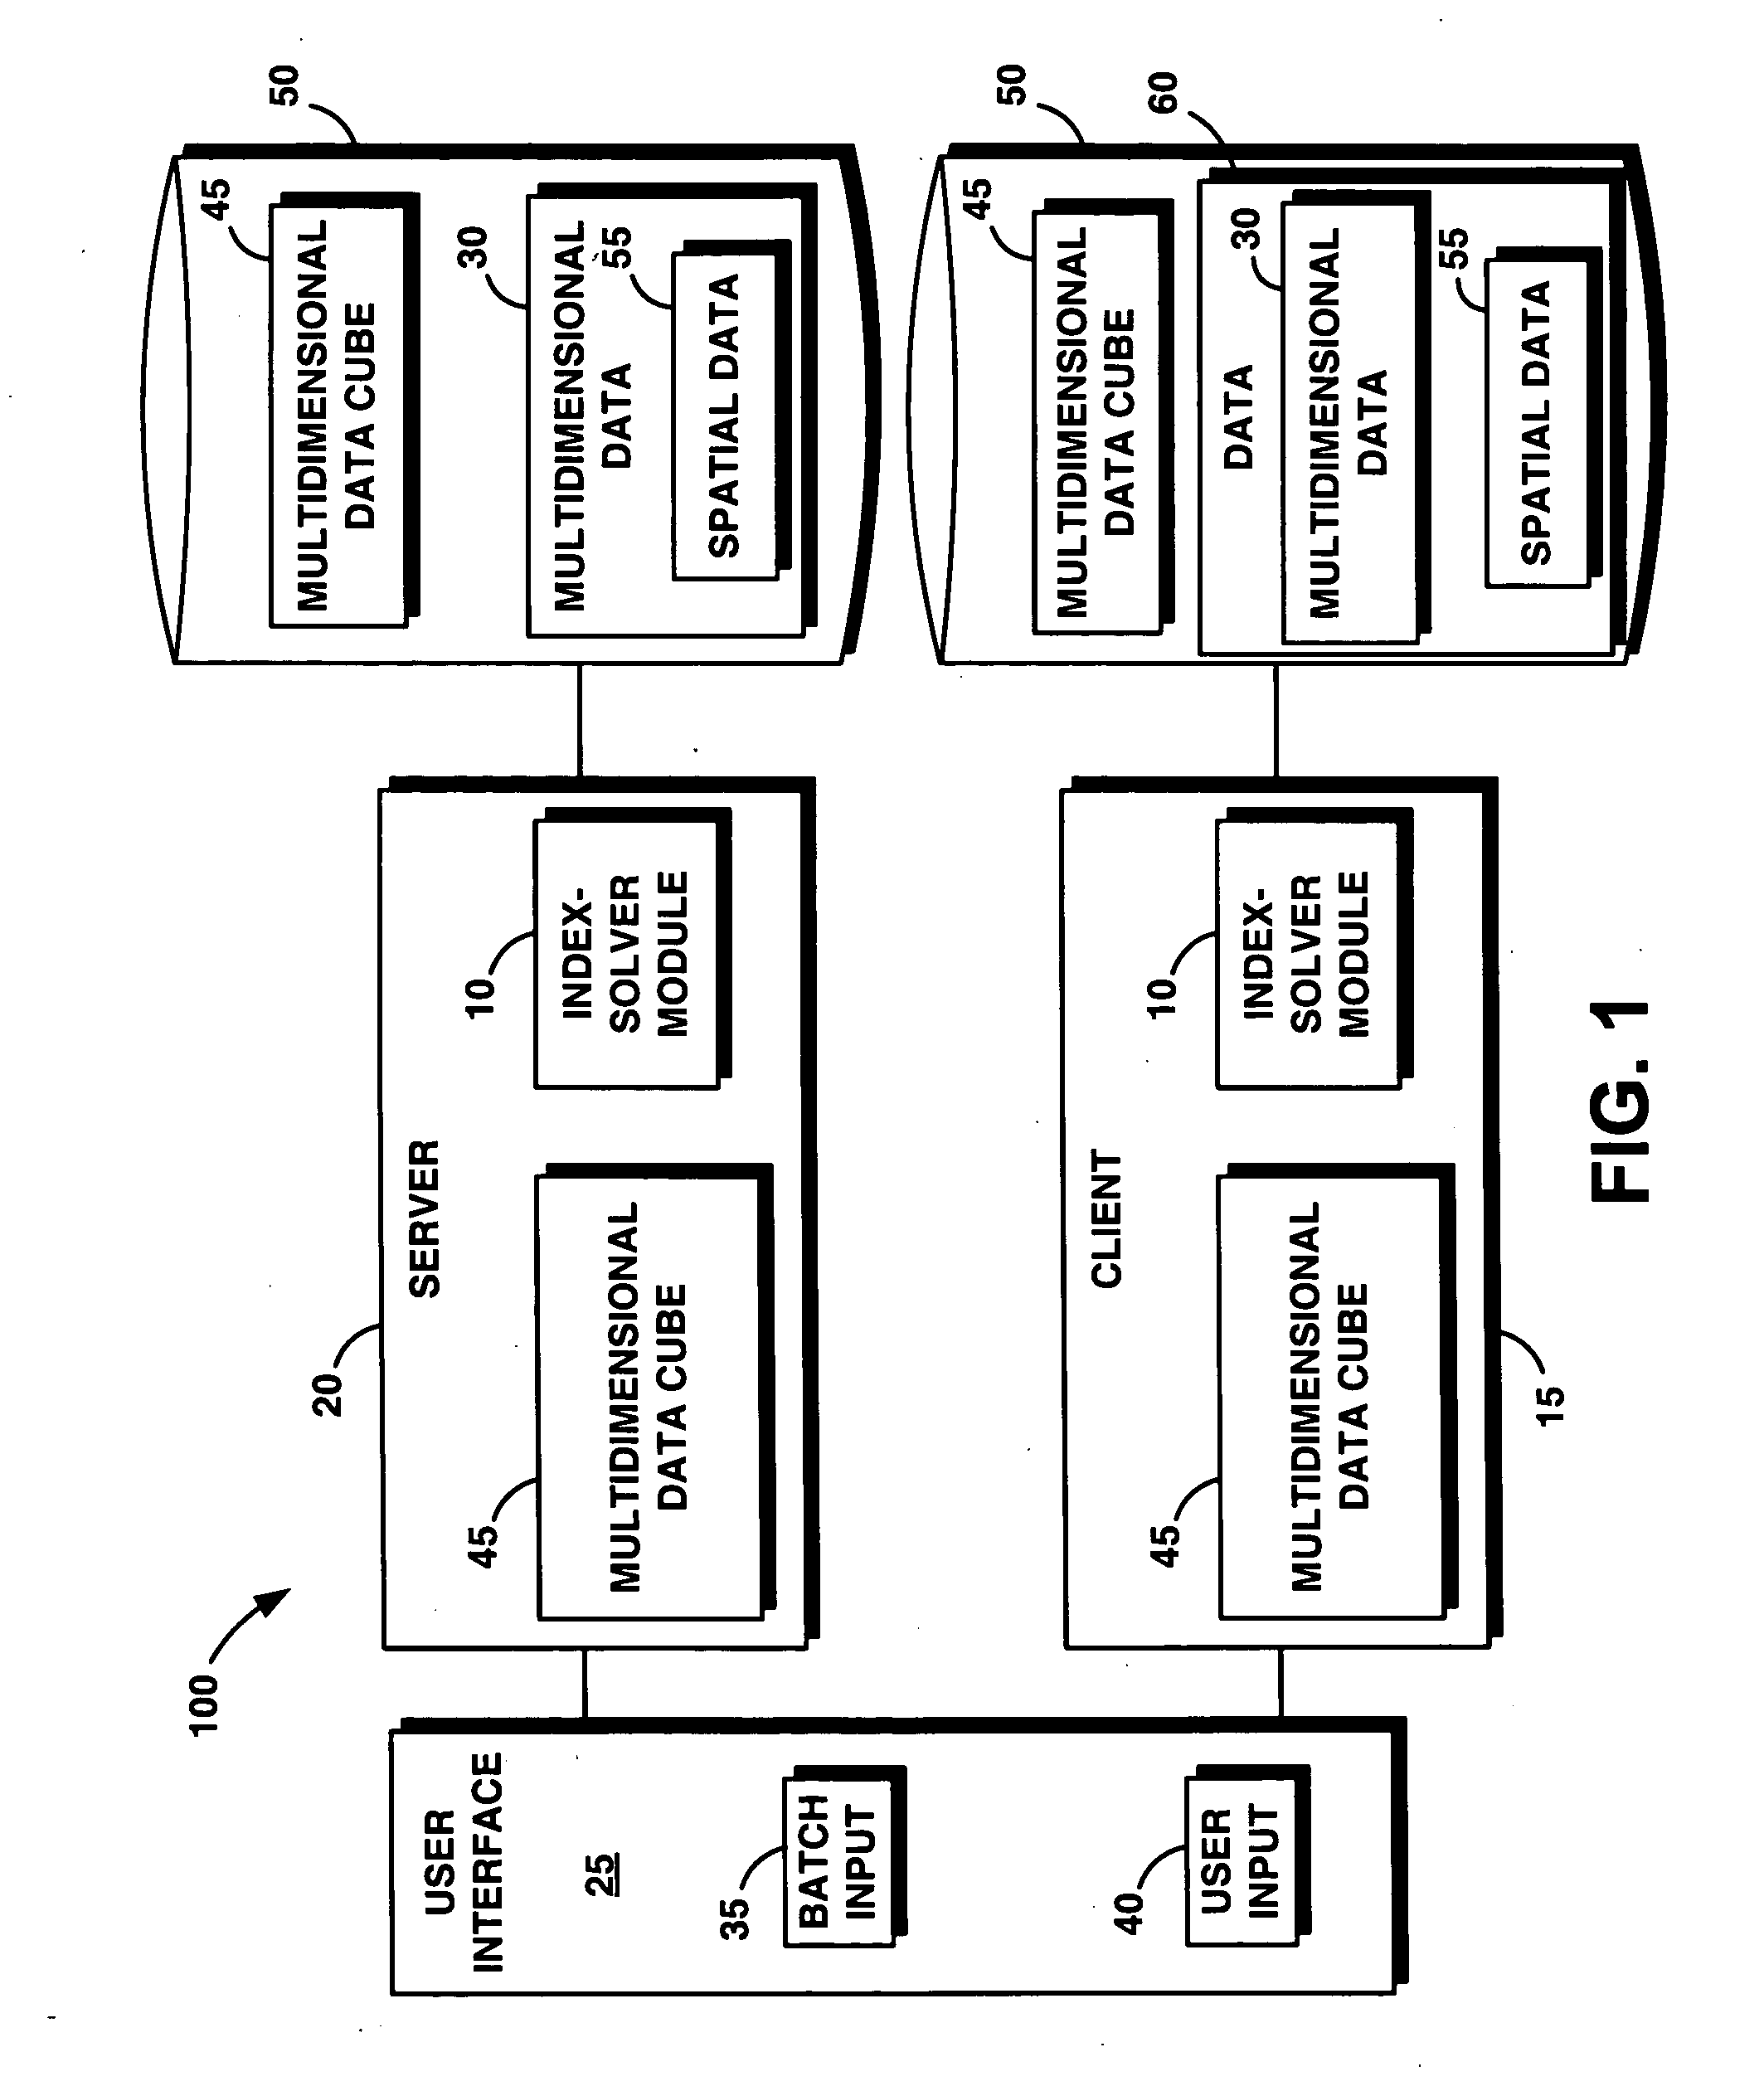 System and method for determining an optimal grid index specification for multidimensional data